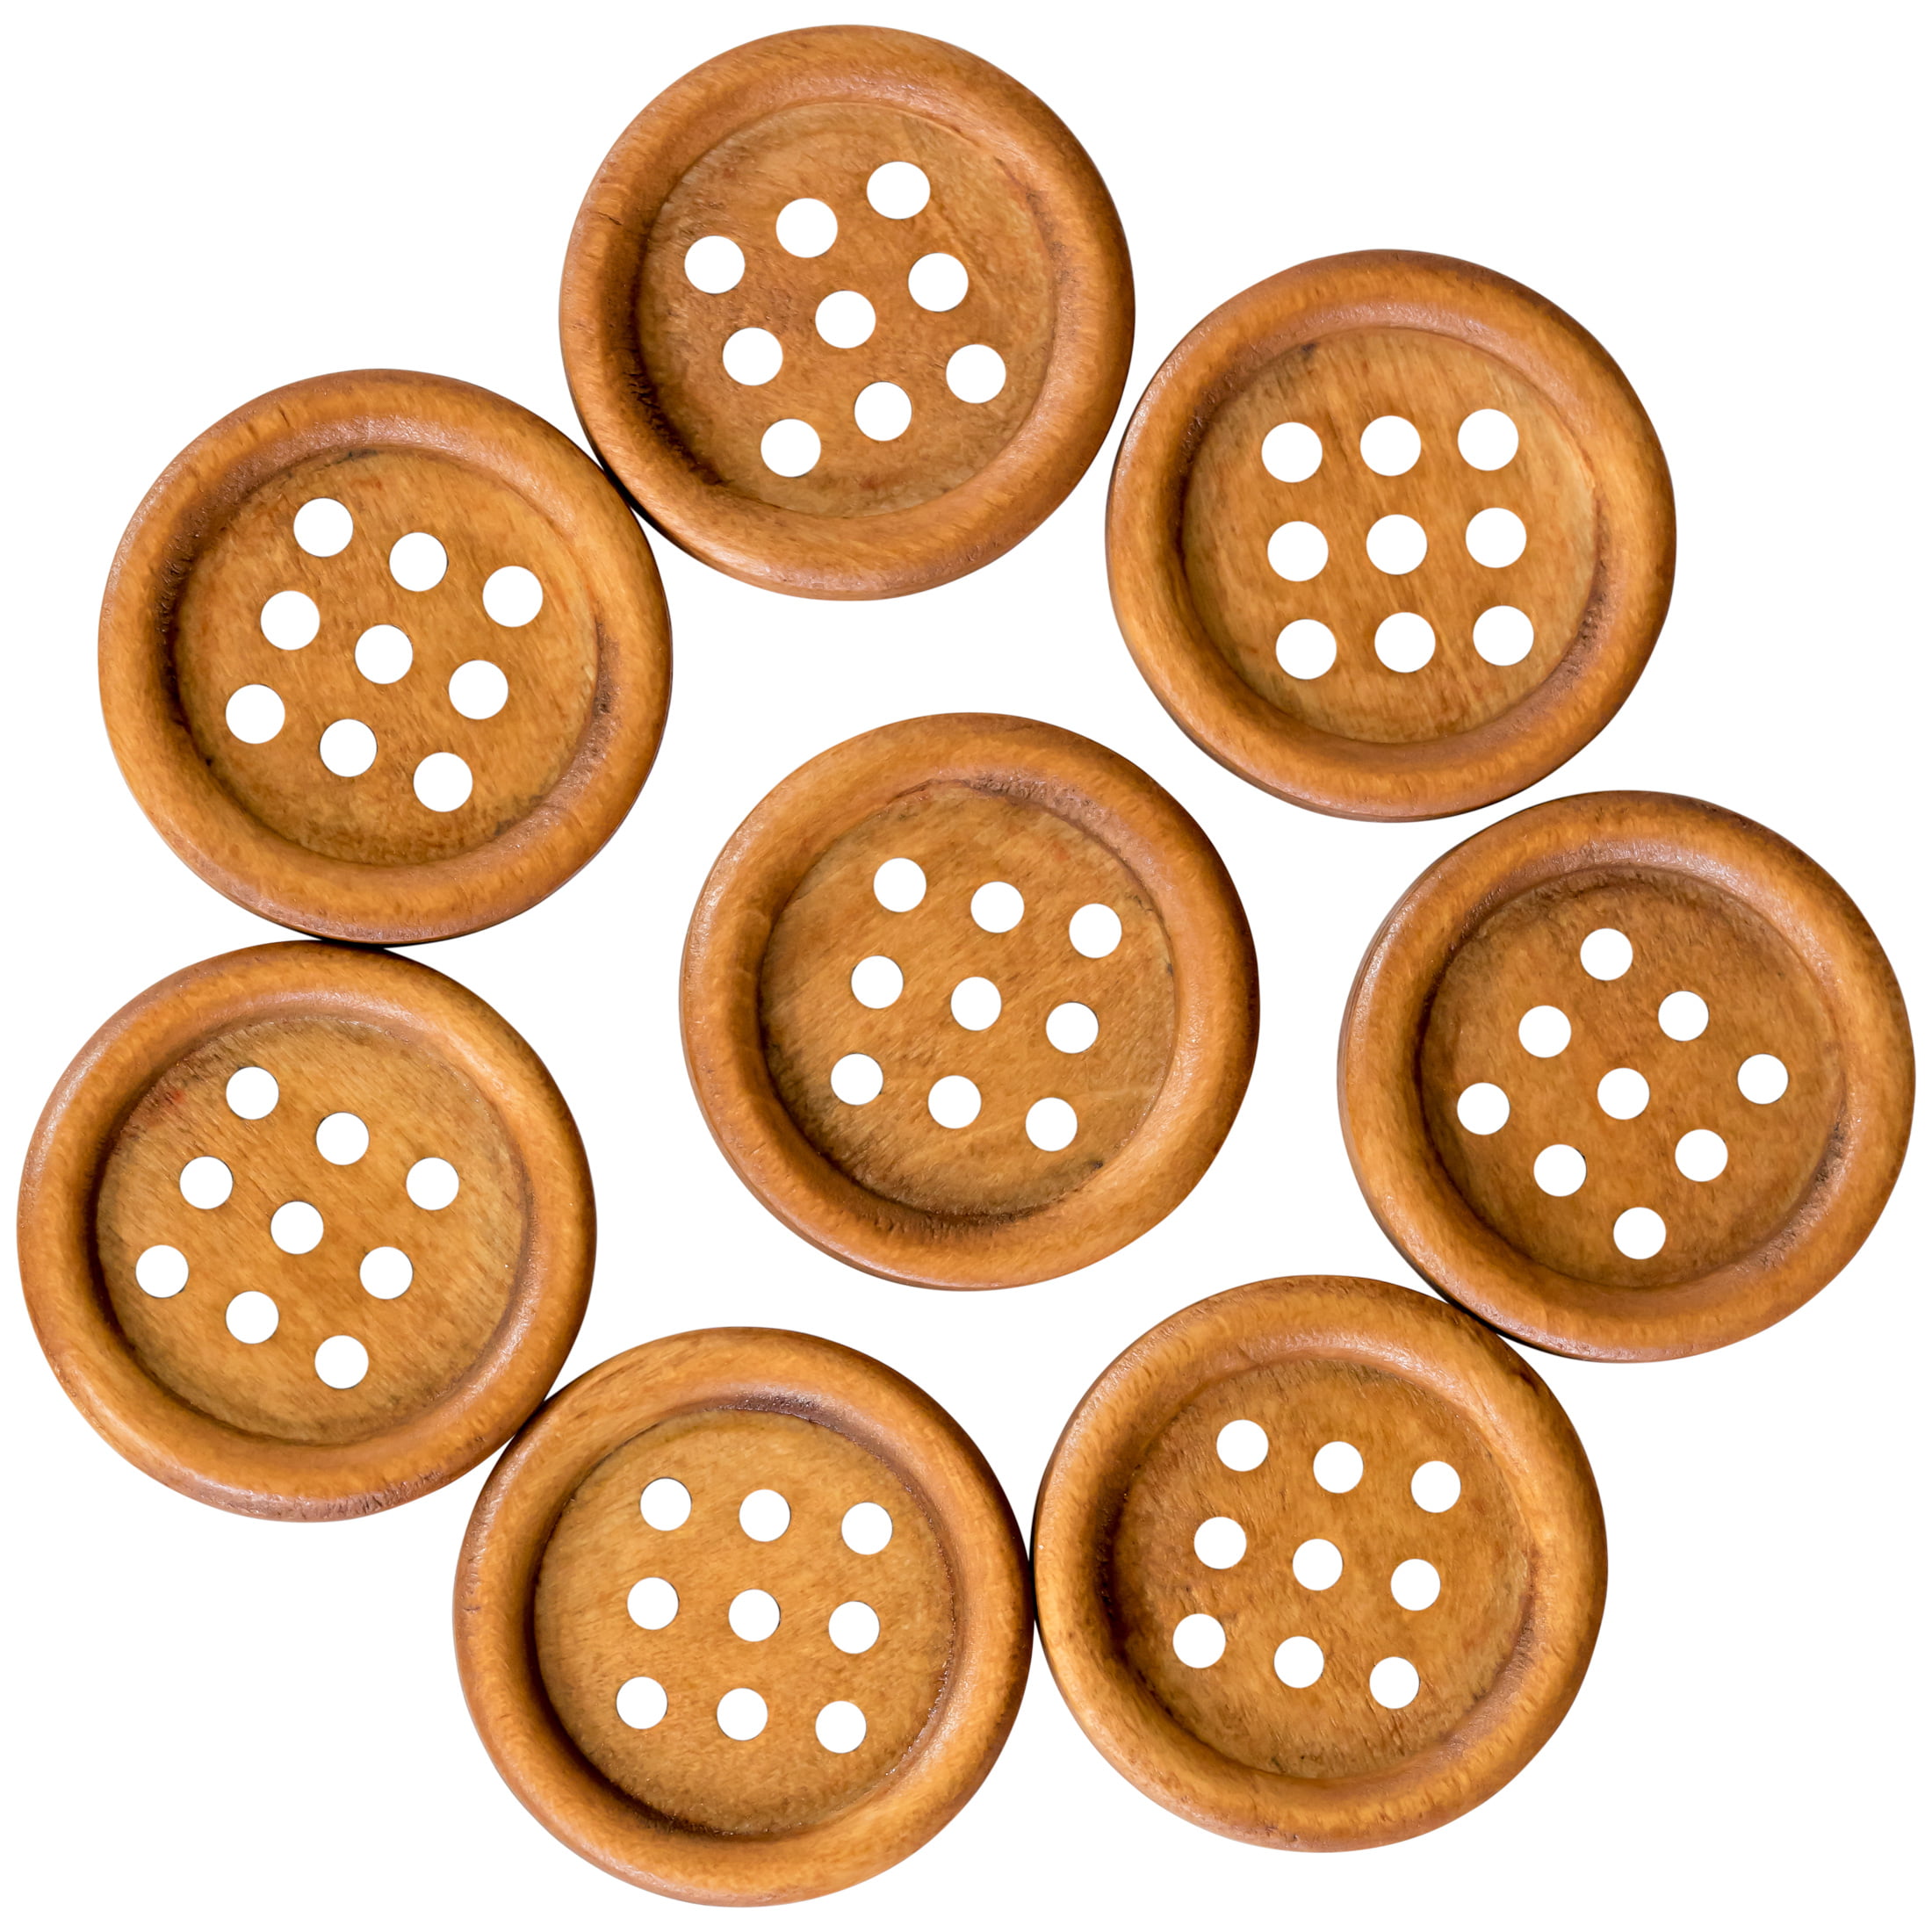 Organic Elements Brown 1 Sew Thru 2-Hole Wood Buttons, 8 Pieces 